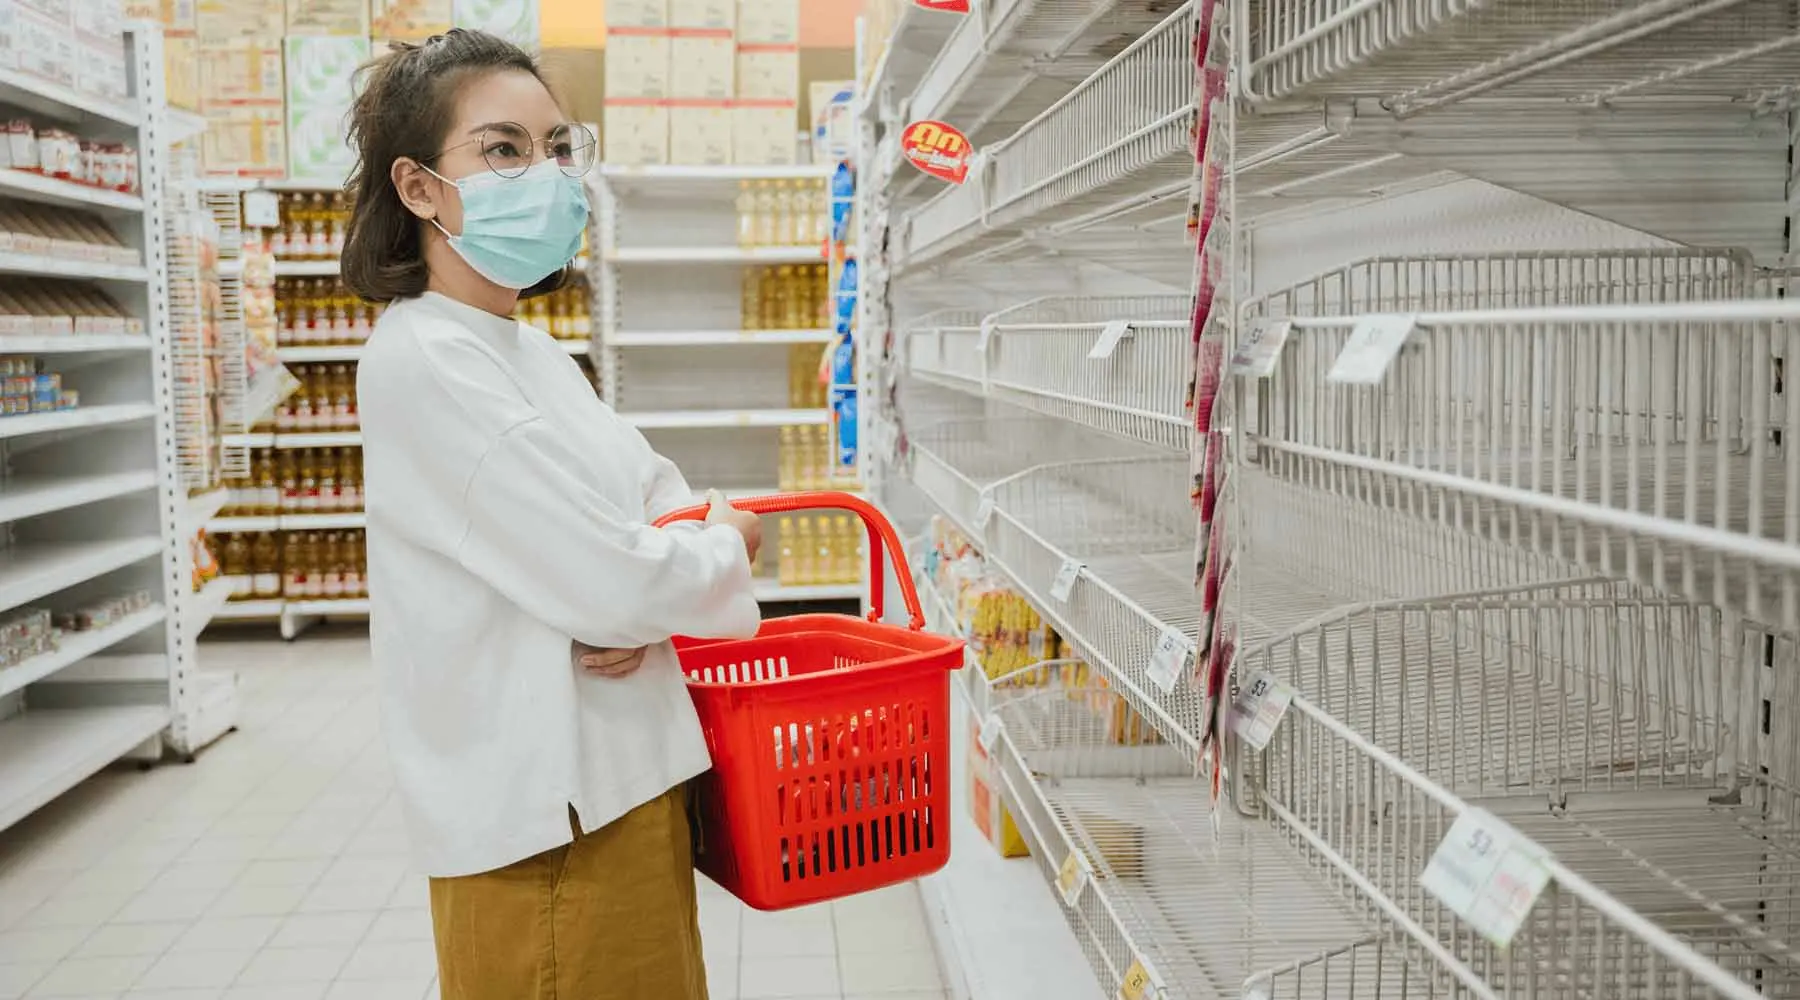 Stock shortages: Where to go when your supply of household essentials runs low